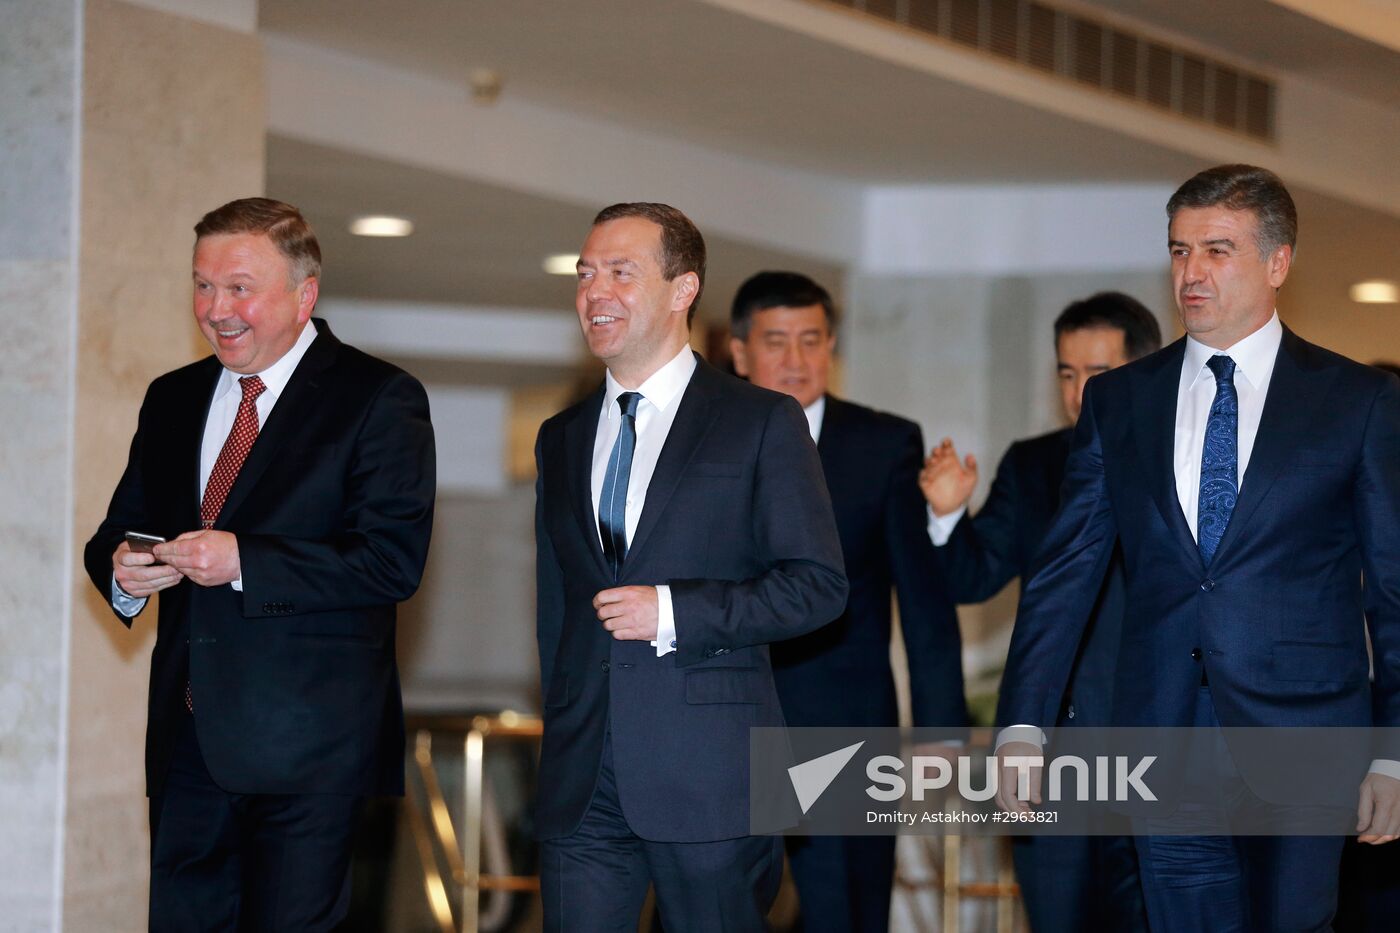 Russian Prime Minister Dmitry Medvedev at a session of the Eurasian Intergovernmental Council